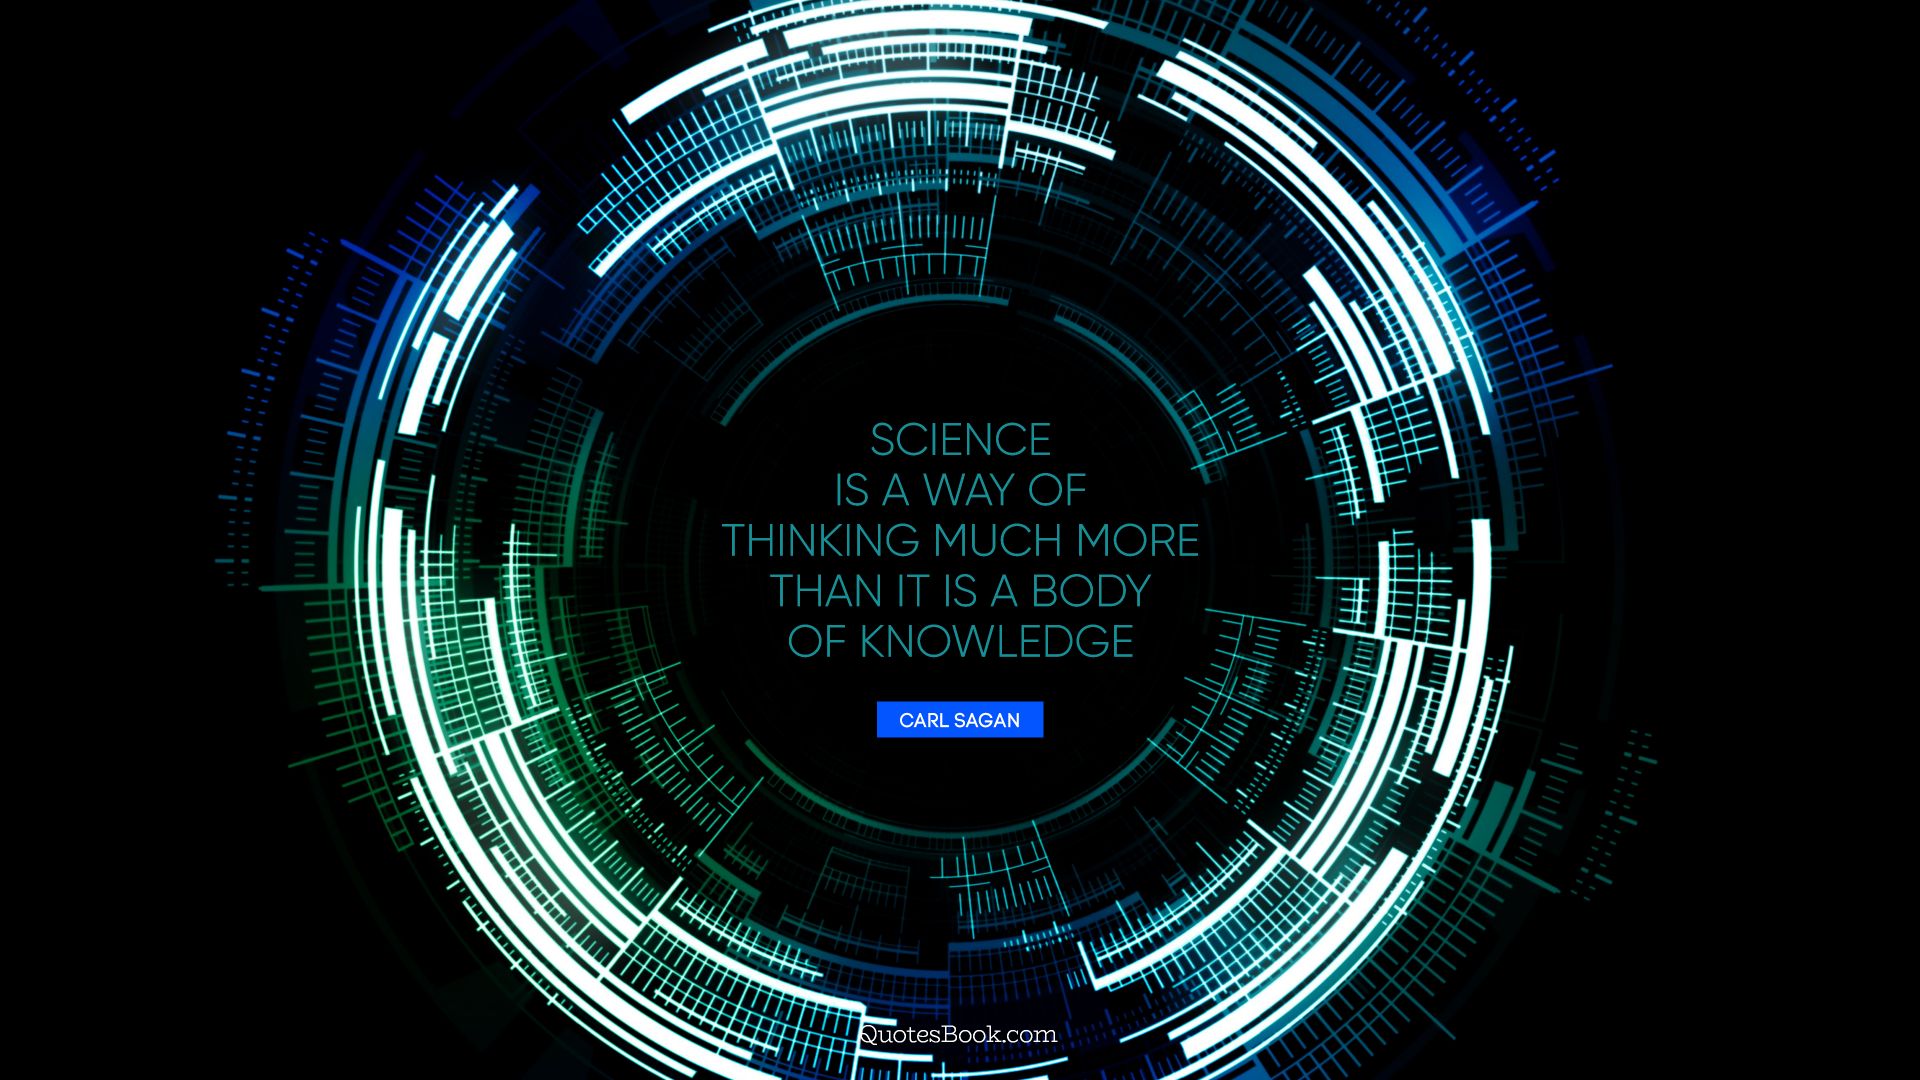 Science is a way of thinking much more than it is a body of knowledge. - Quote by Carl Sagan